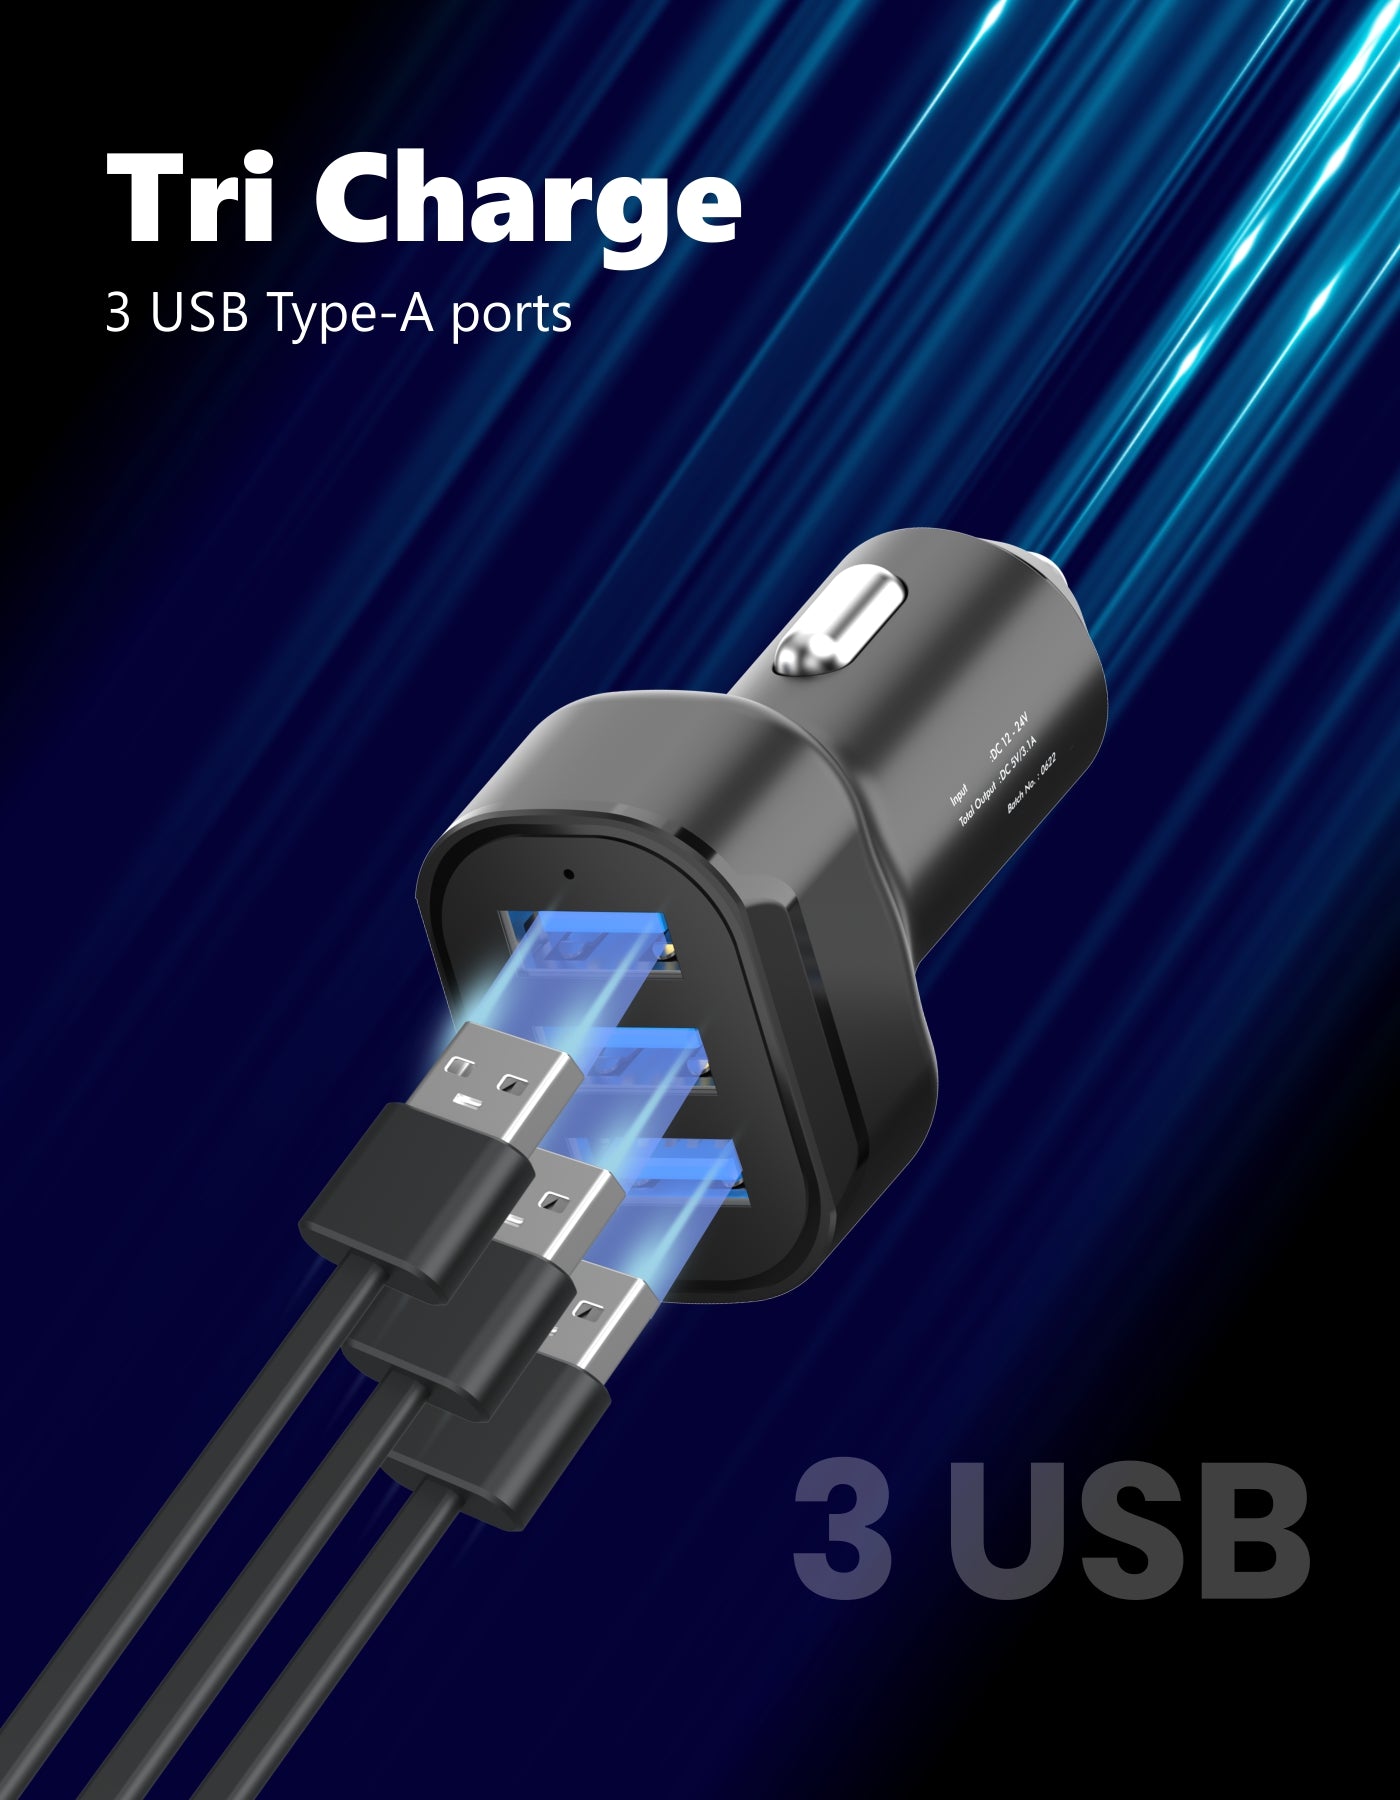 Portronics Car Power 11 car USB charger with 3 USB ports